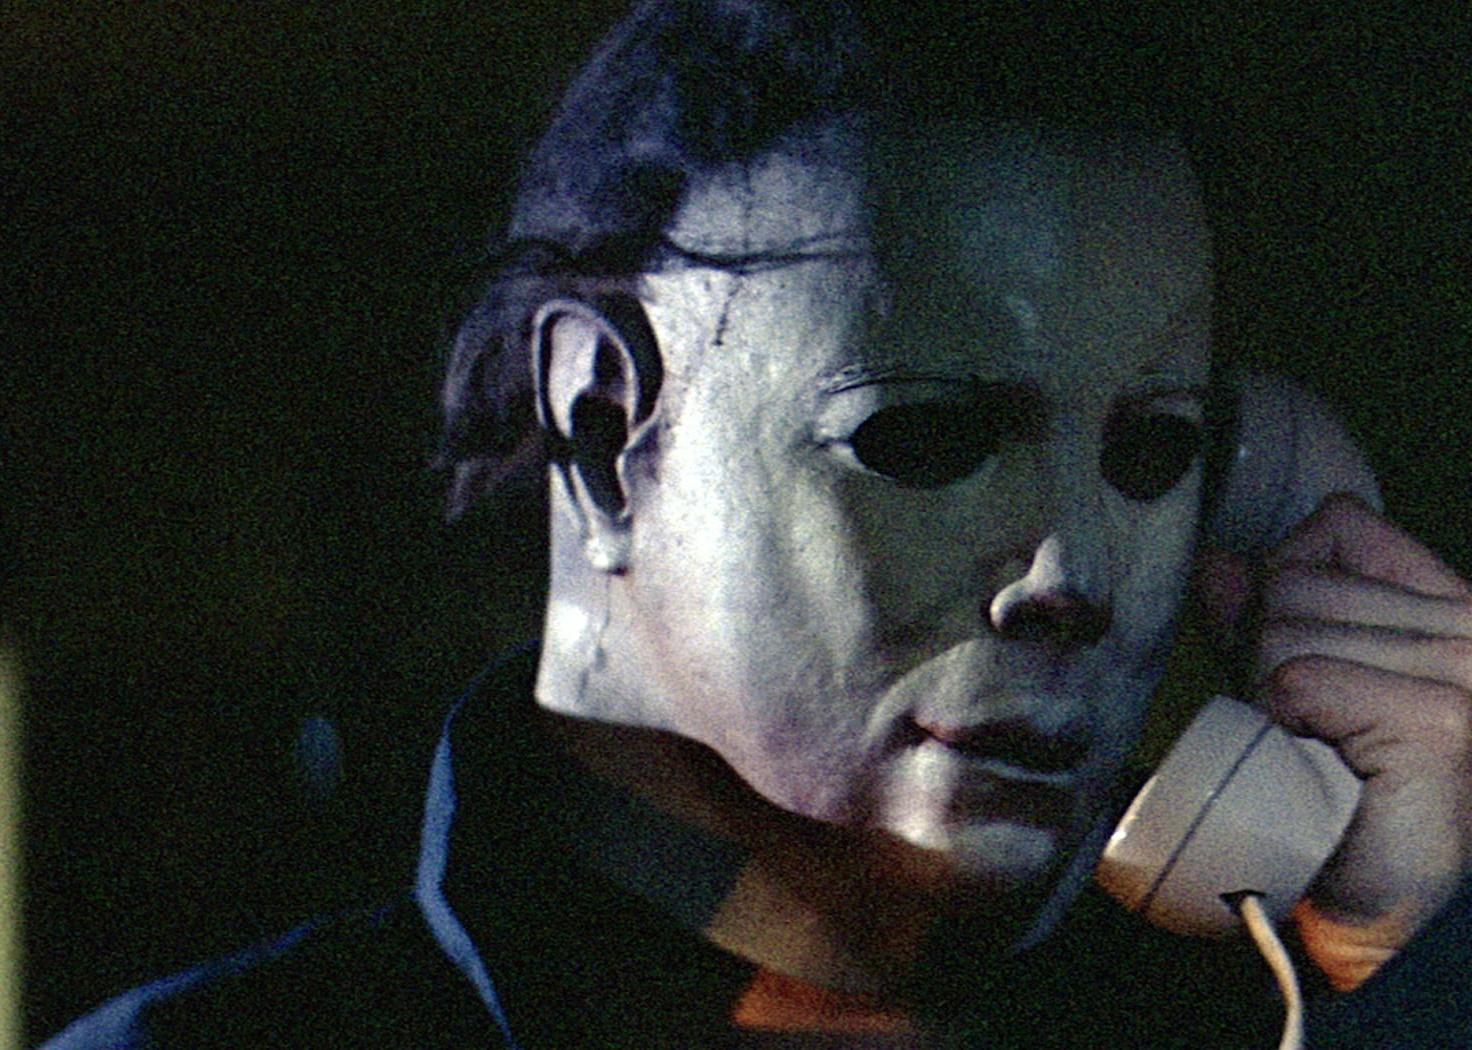 The killer, Michael Myers, wearing a white face mask and talking on the phone.